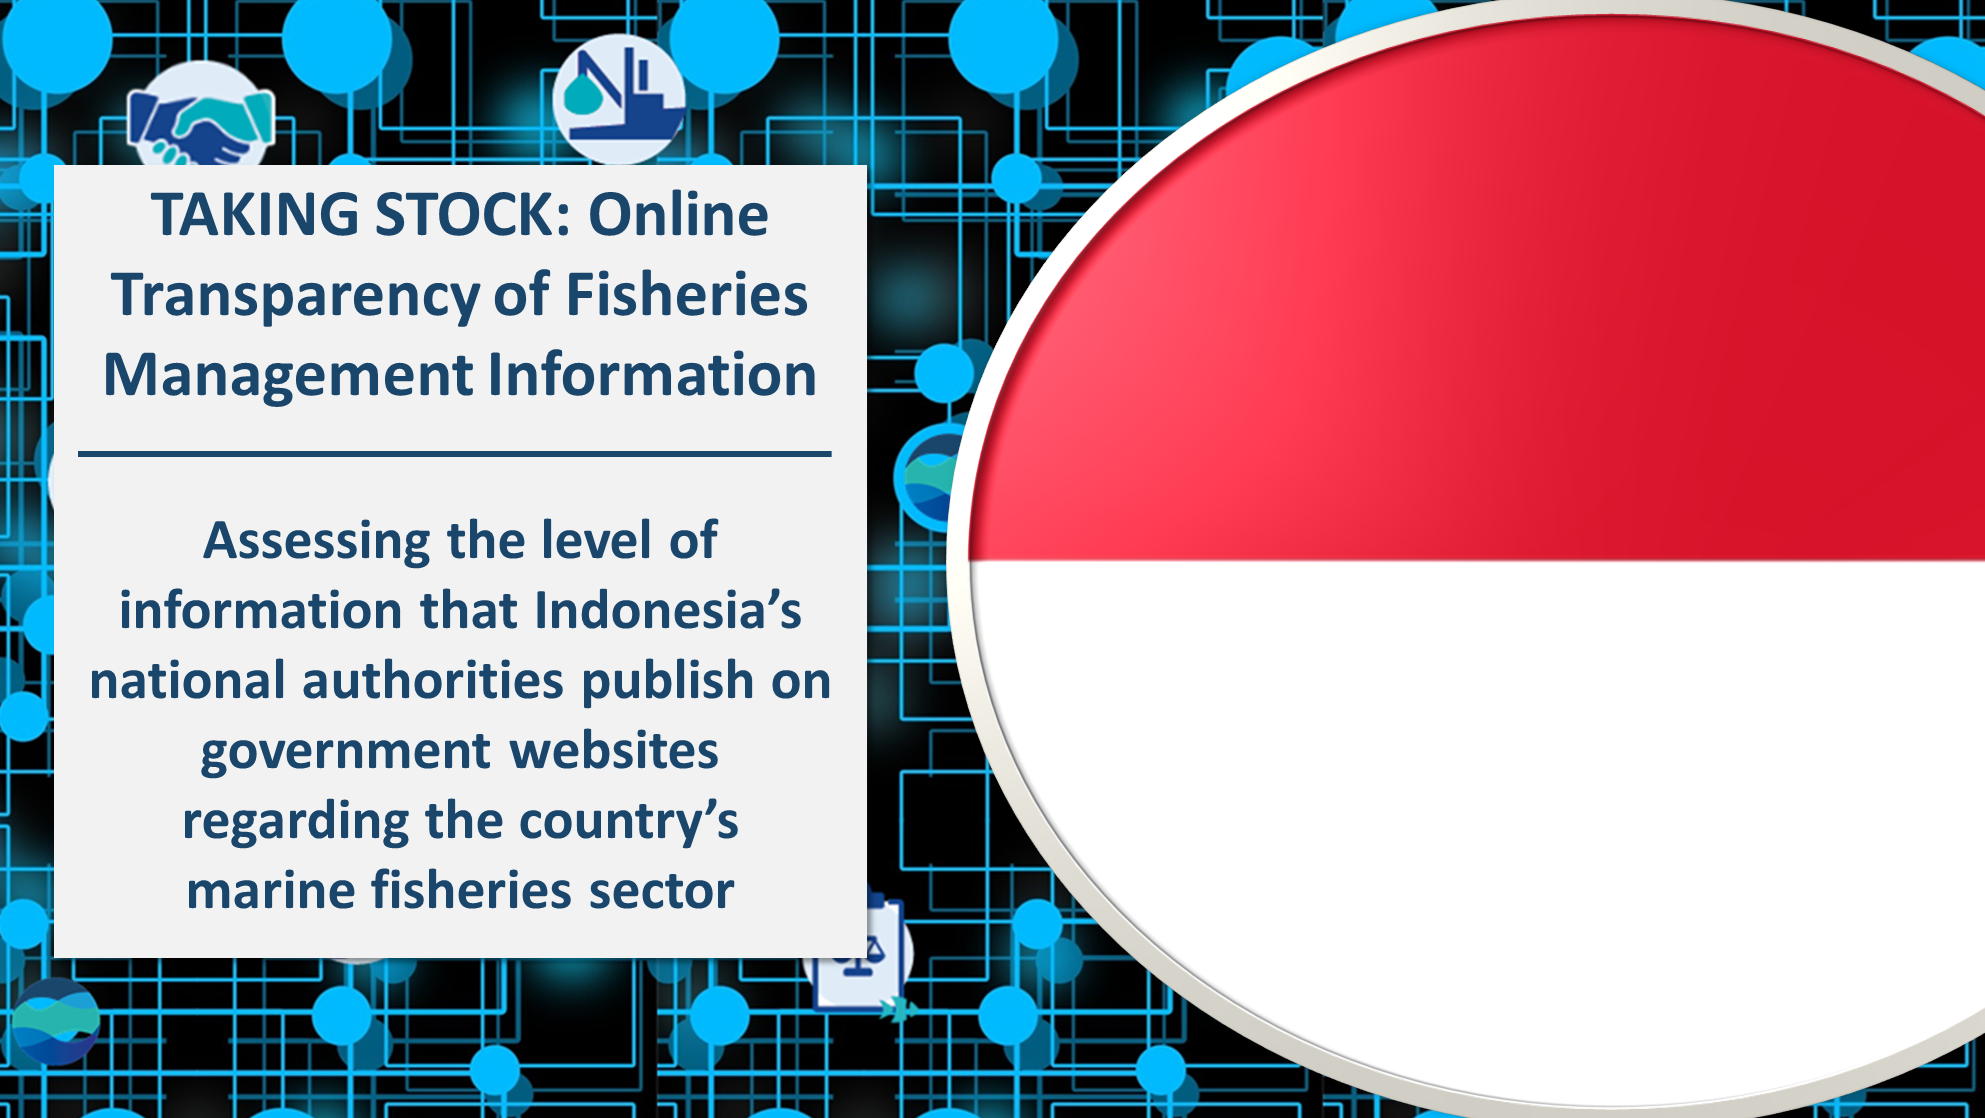 A text box and the Indonesia flag cropped to a circle, all resting on a background of blue connected dots. The text title reads "TAKING STOCK:Online Transparency of Fisheries Management Information. Assessing the level of information that Indonesia's national authorities publish on government websites regarding the country's marine fisheries sector.